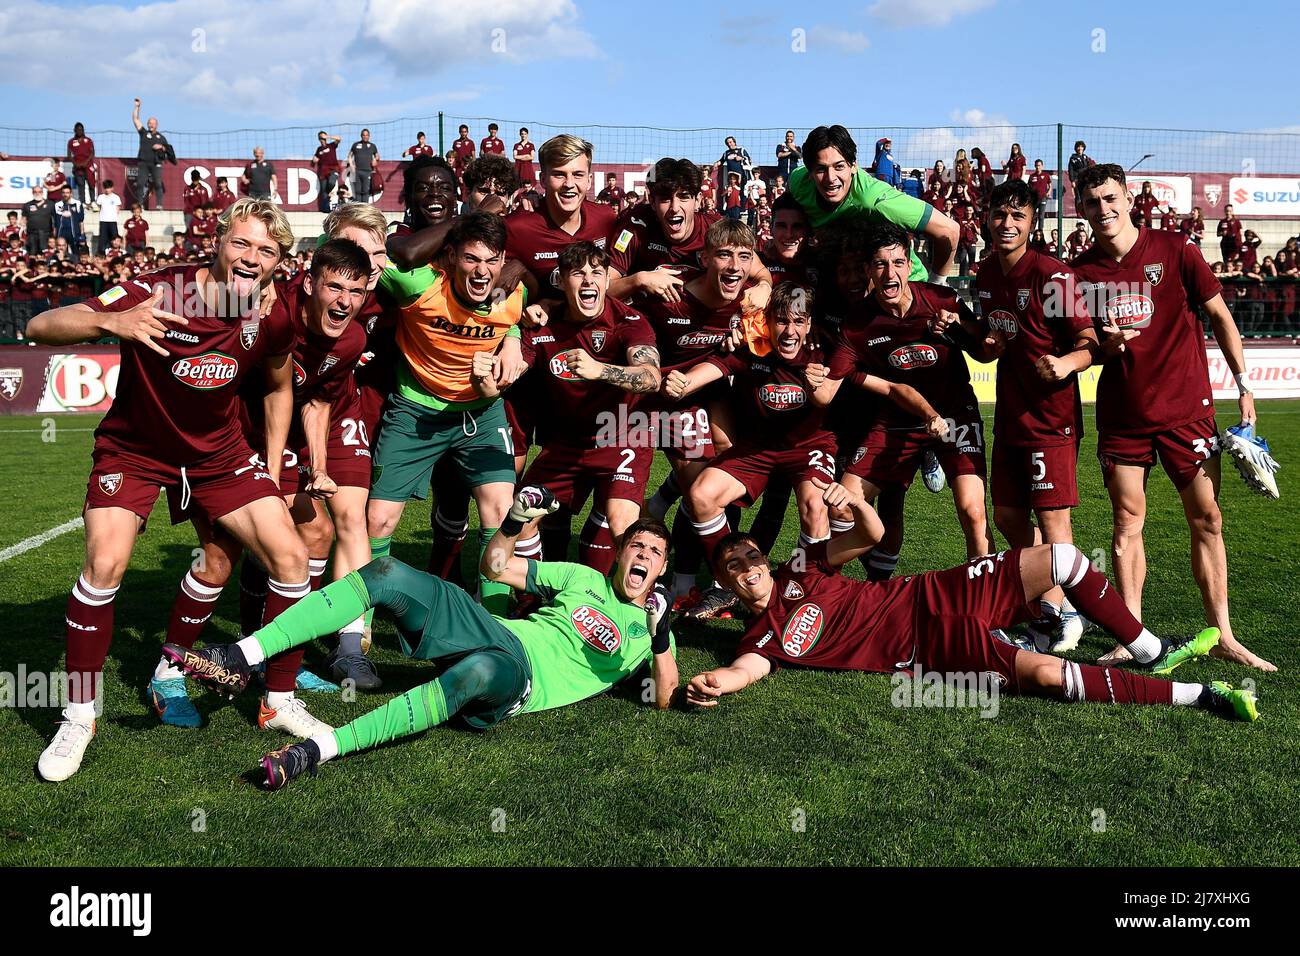 Torino FC Academy has a new Arena in Brazil - Limonta Sport